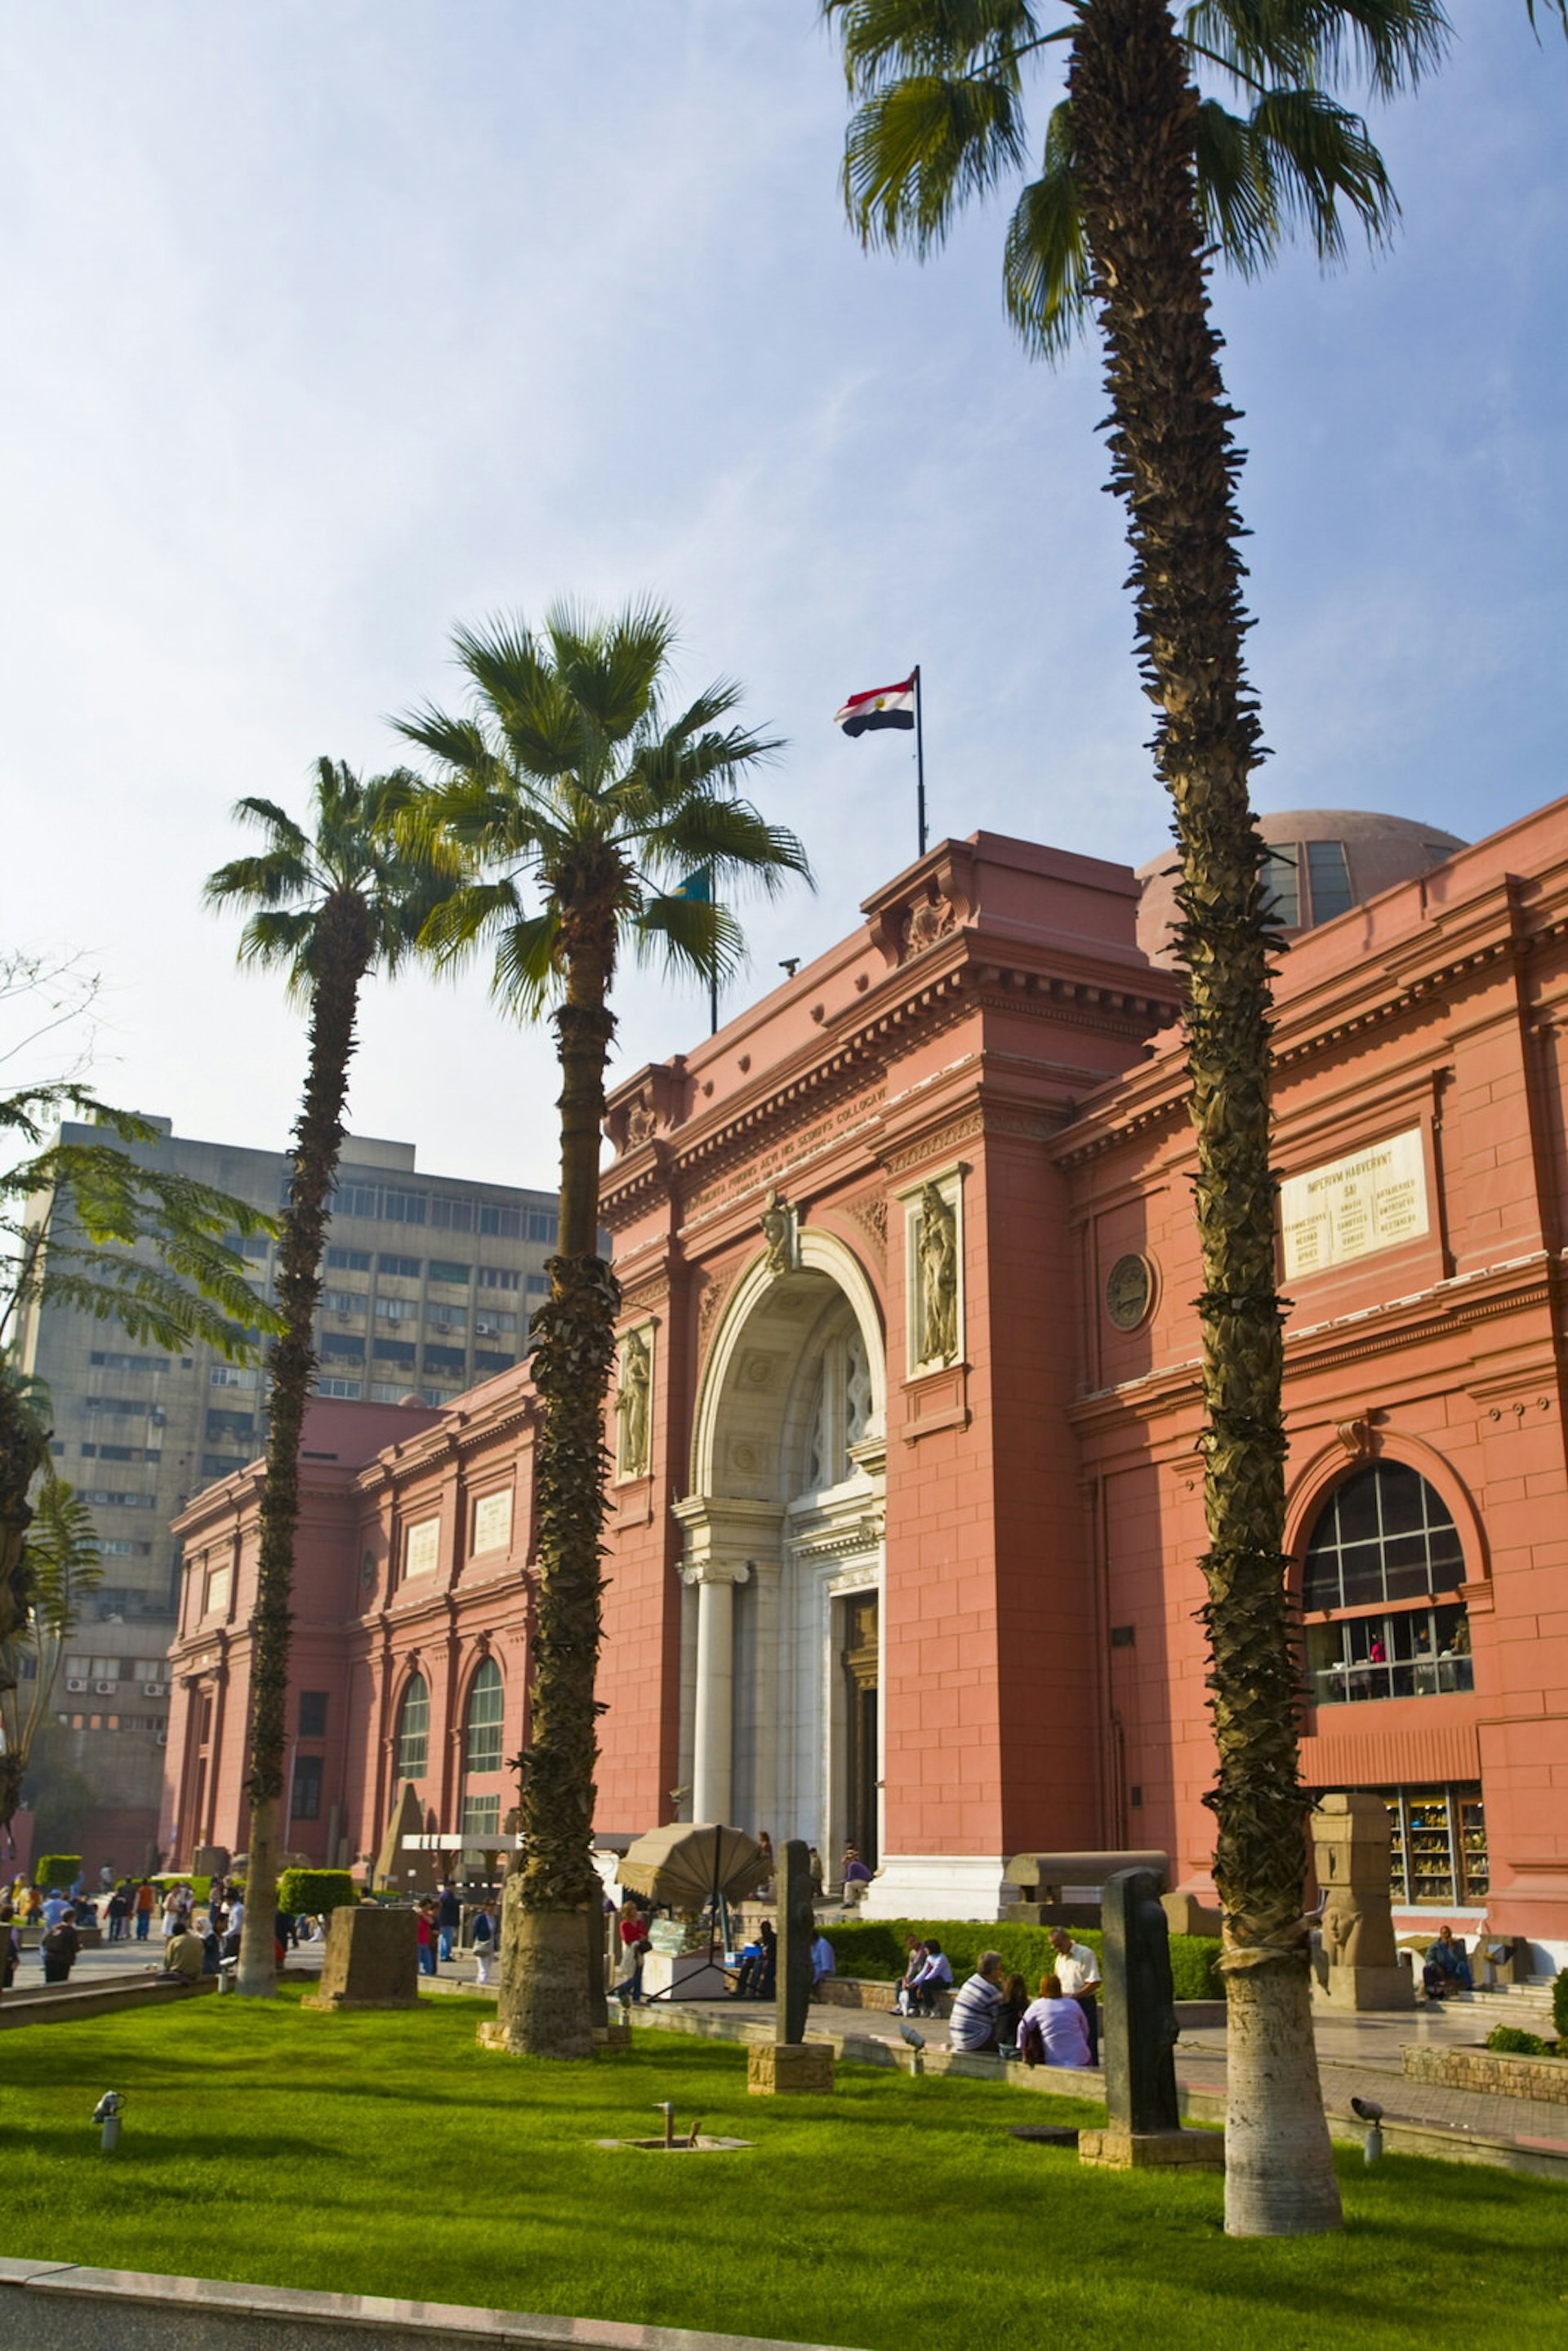 Exterior of Egyptian Museum in Cairo, Egypt